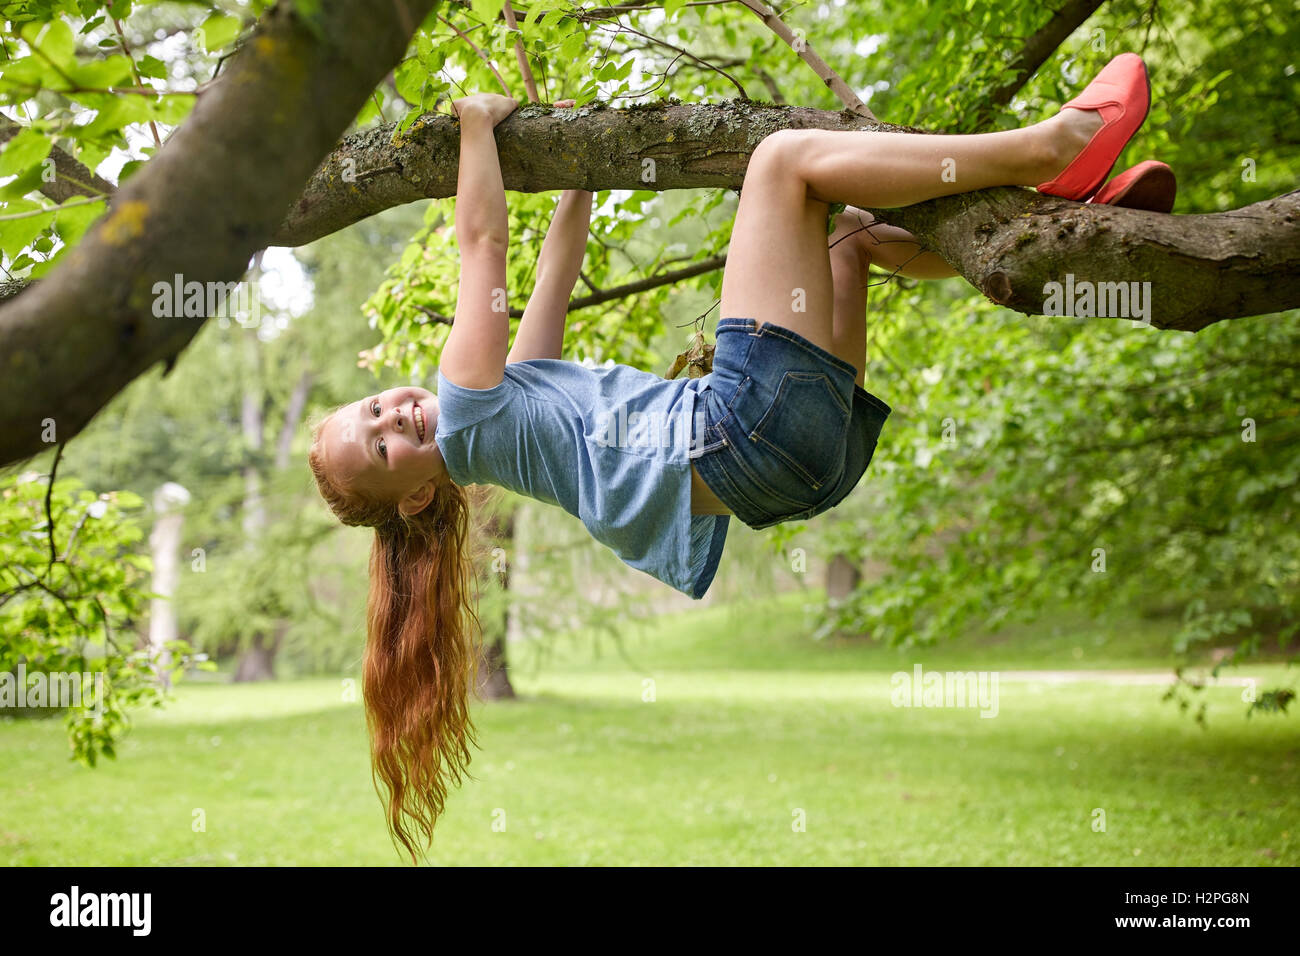 happy little girl hanging on tree in summer park Stock Photo